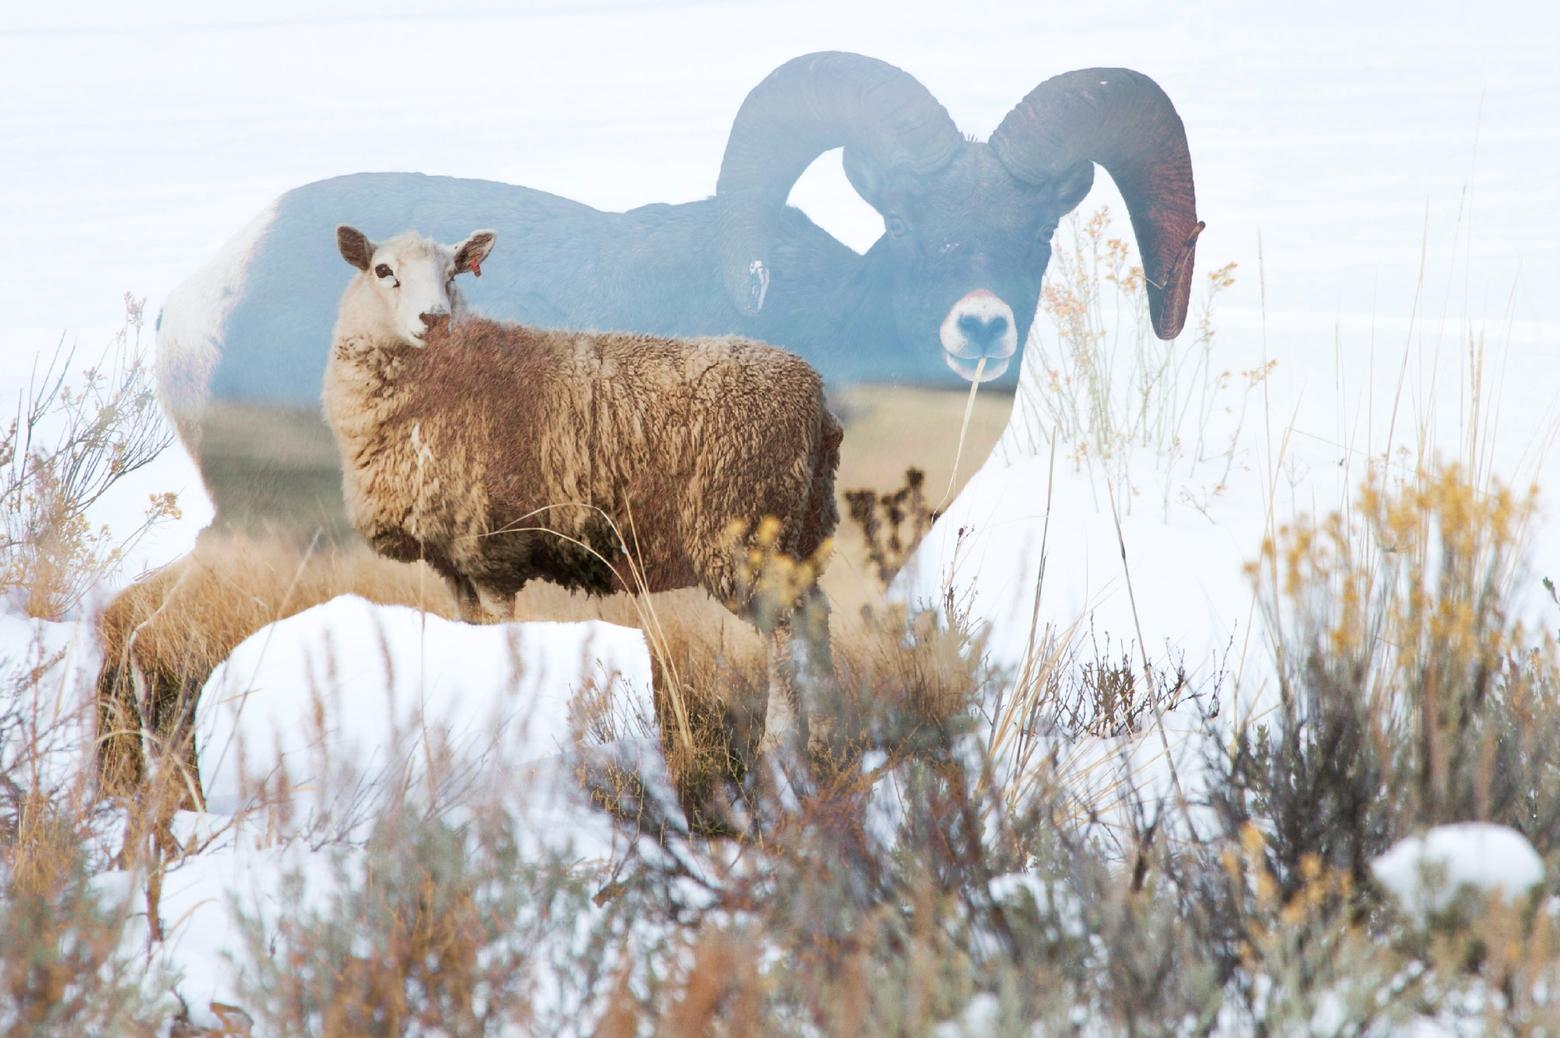 Researchers at Montana State University have been studying the domestic and bighorn sheep interactions, but recently received $4 million in university funding to initiate the latest research. Photos by Diane Renkin and Martin Schmidli. Illustration by Julia Barton